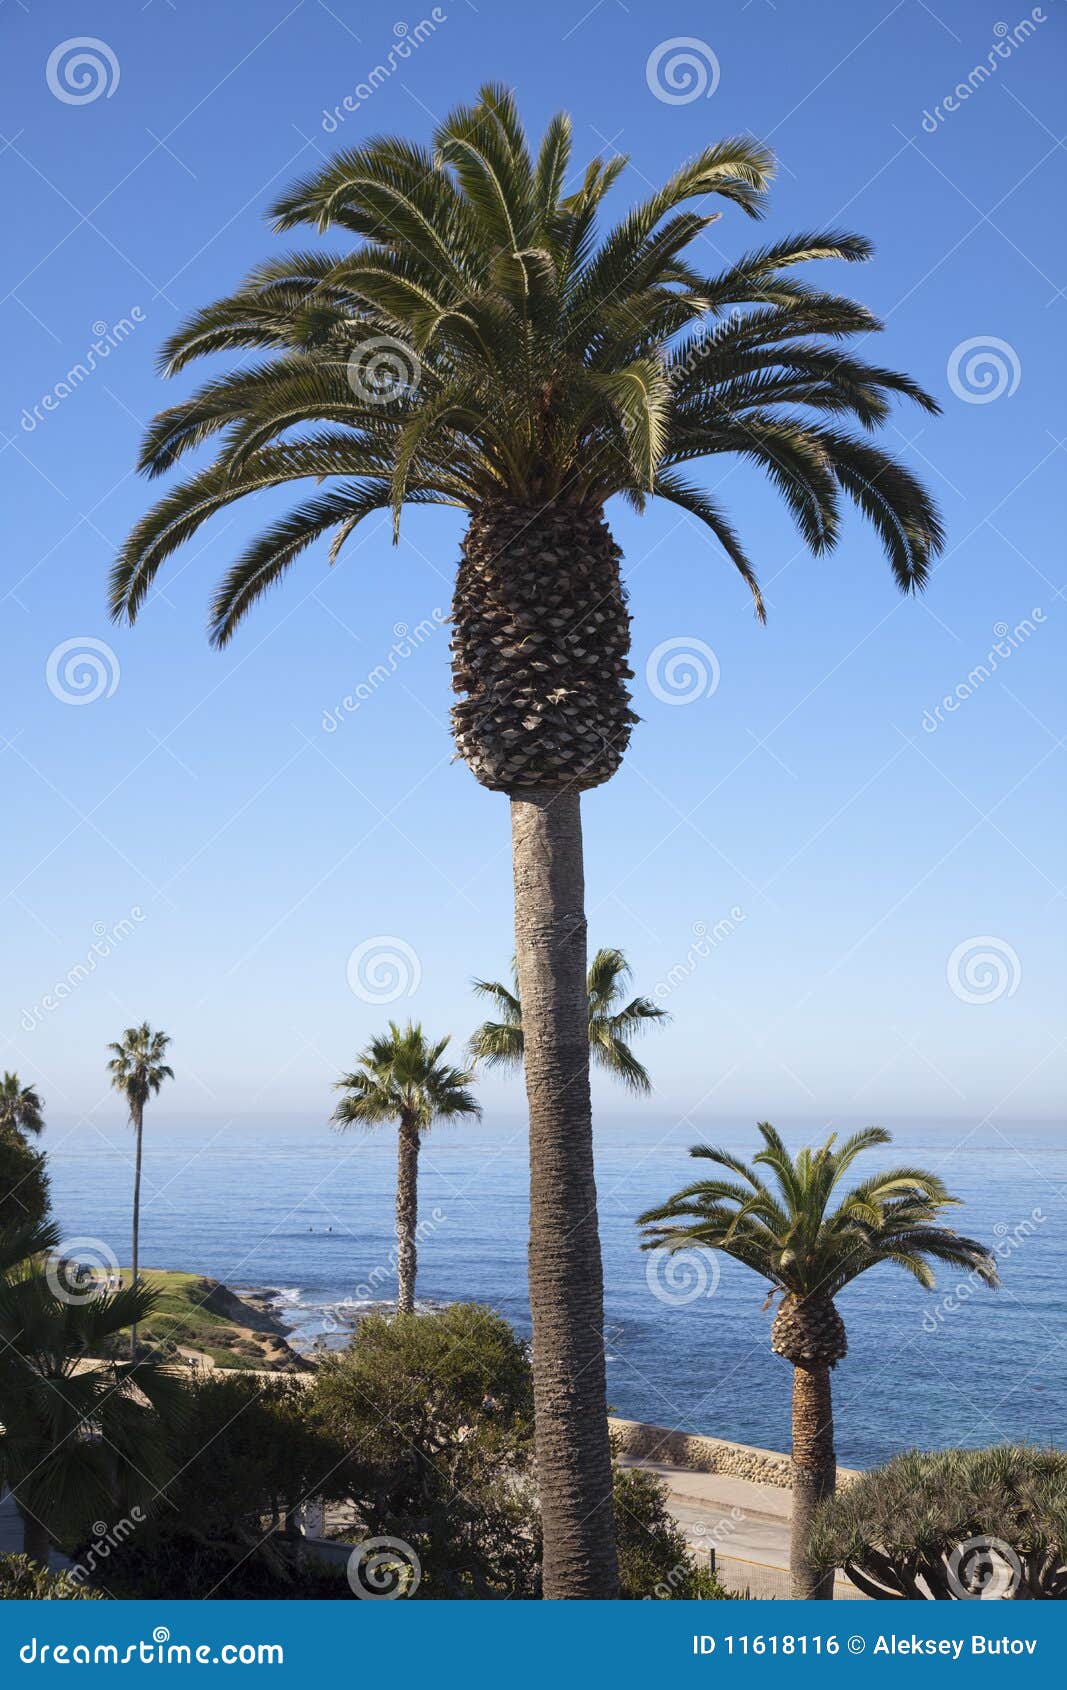 palms in front of pacific ocean